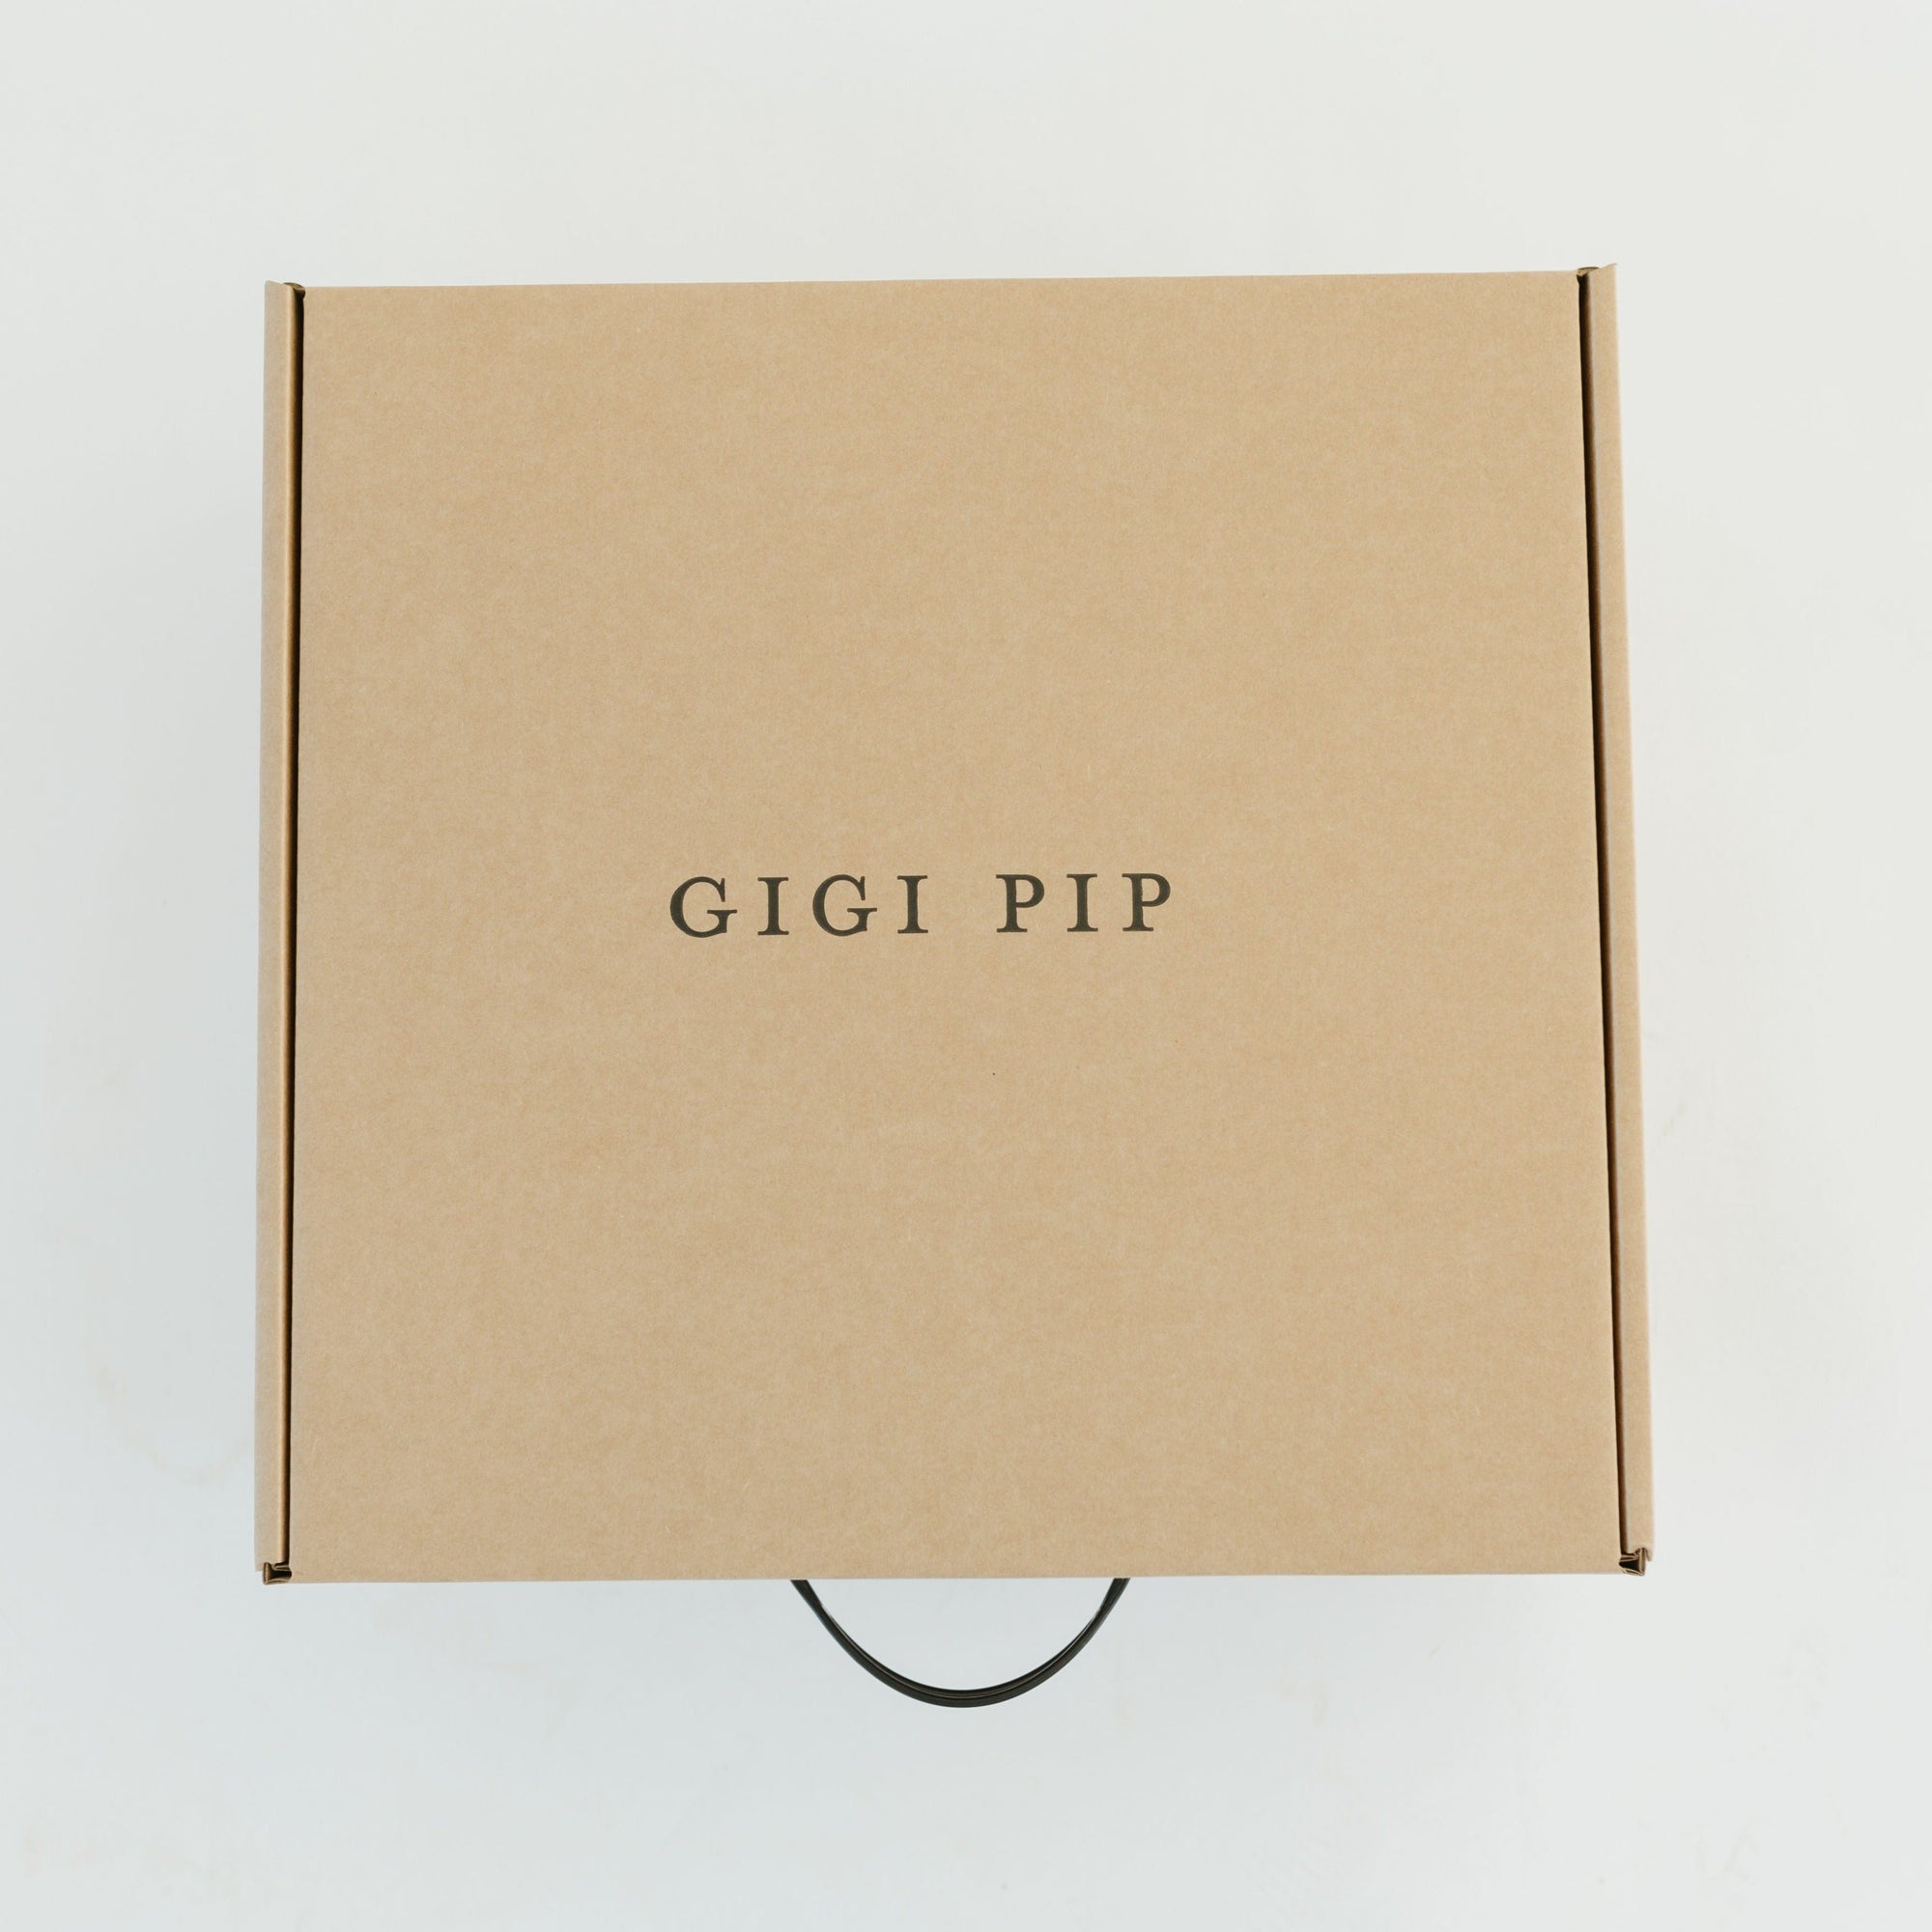 Gigi Pip hat care products - Hat Keepsake Box - foldover cardboard box with plastic handle, able to hold up to three hats for storage + comes with a Gigi Pip branded hat keepsake bag [natural]